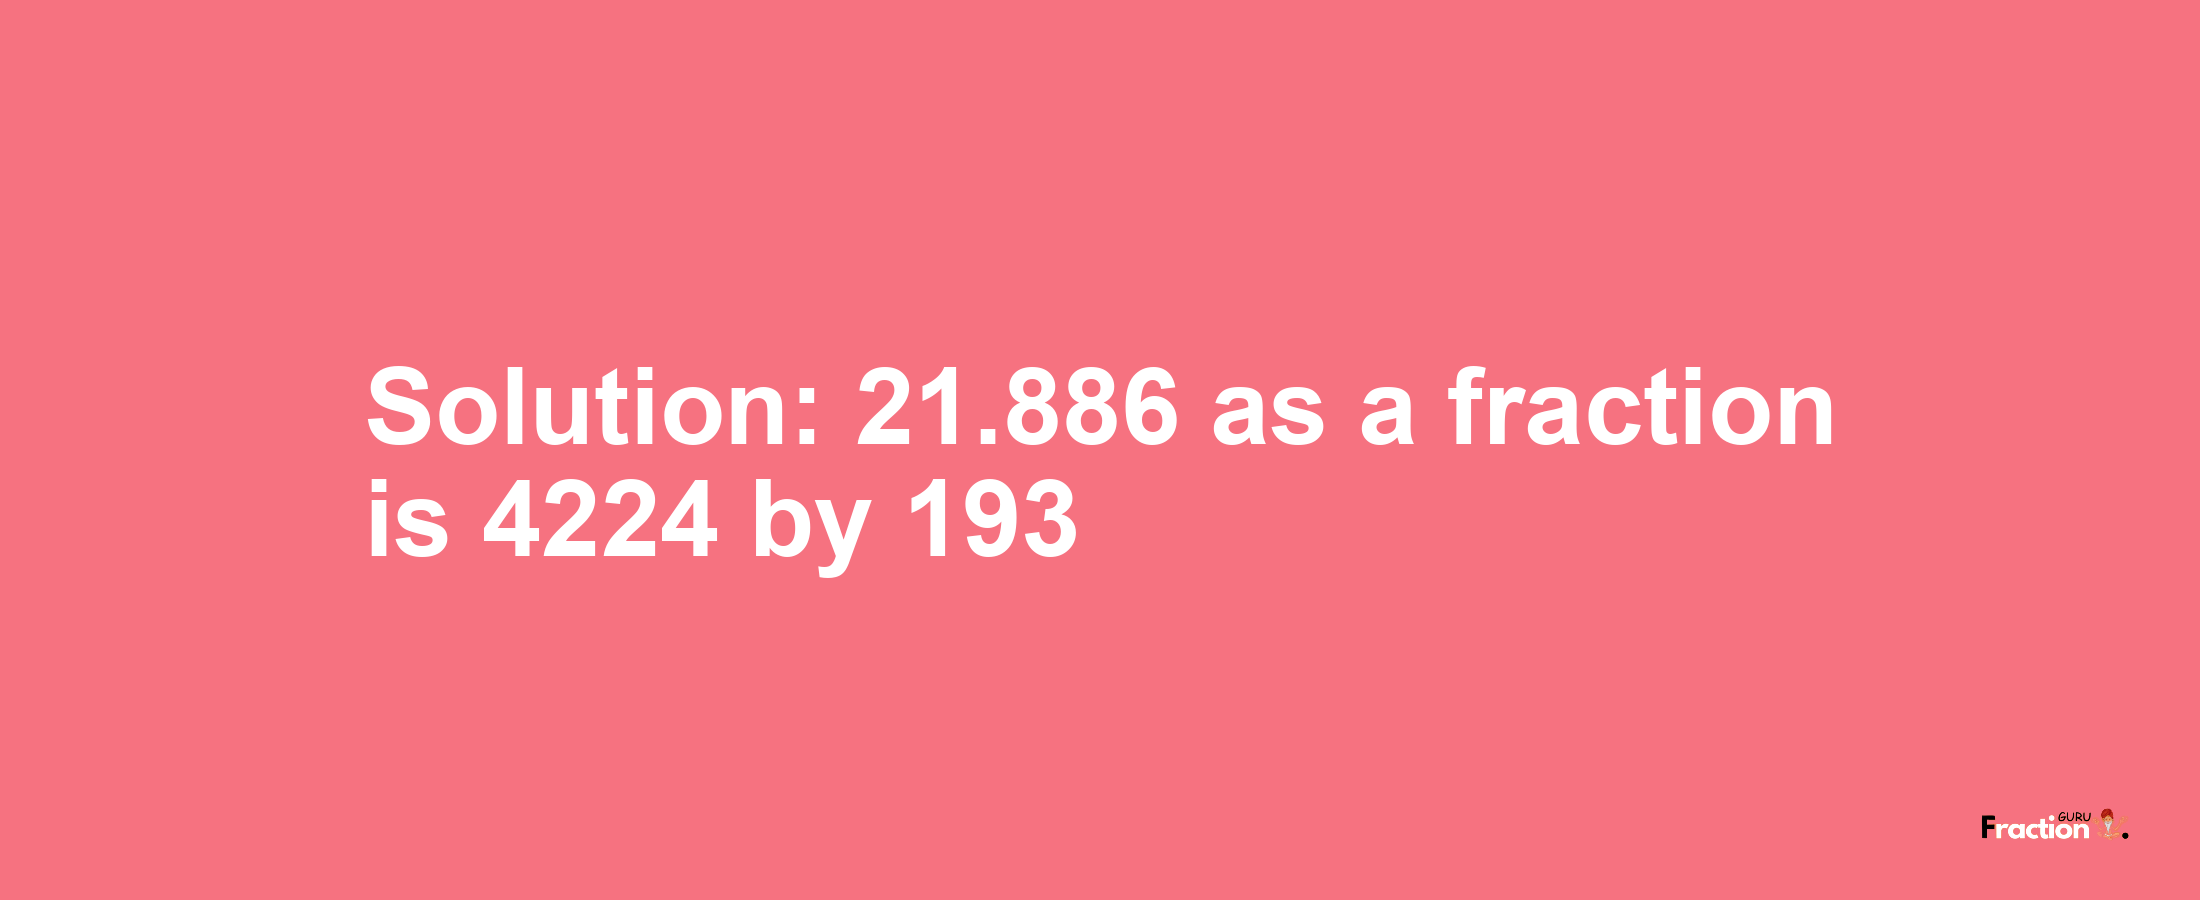 Solution:21.886 as a fraction is 4224/193